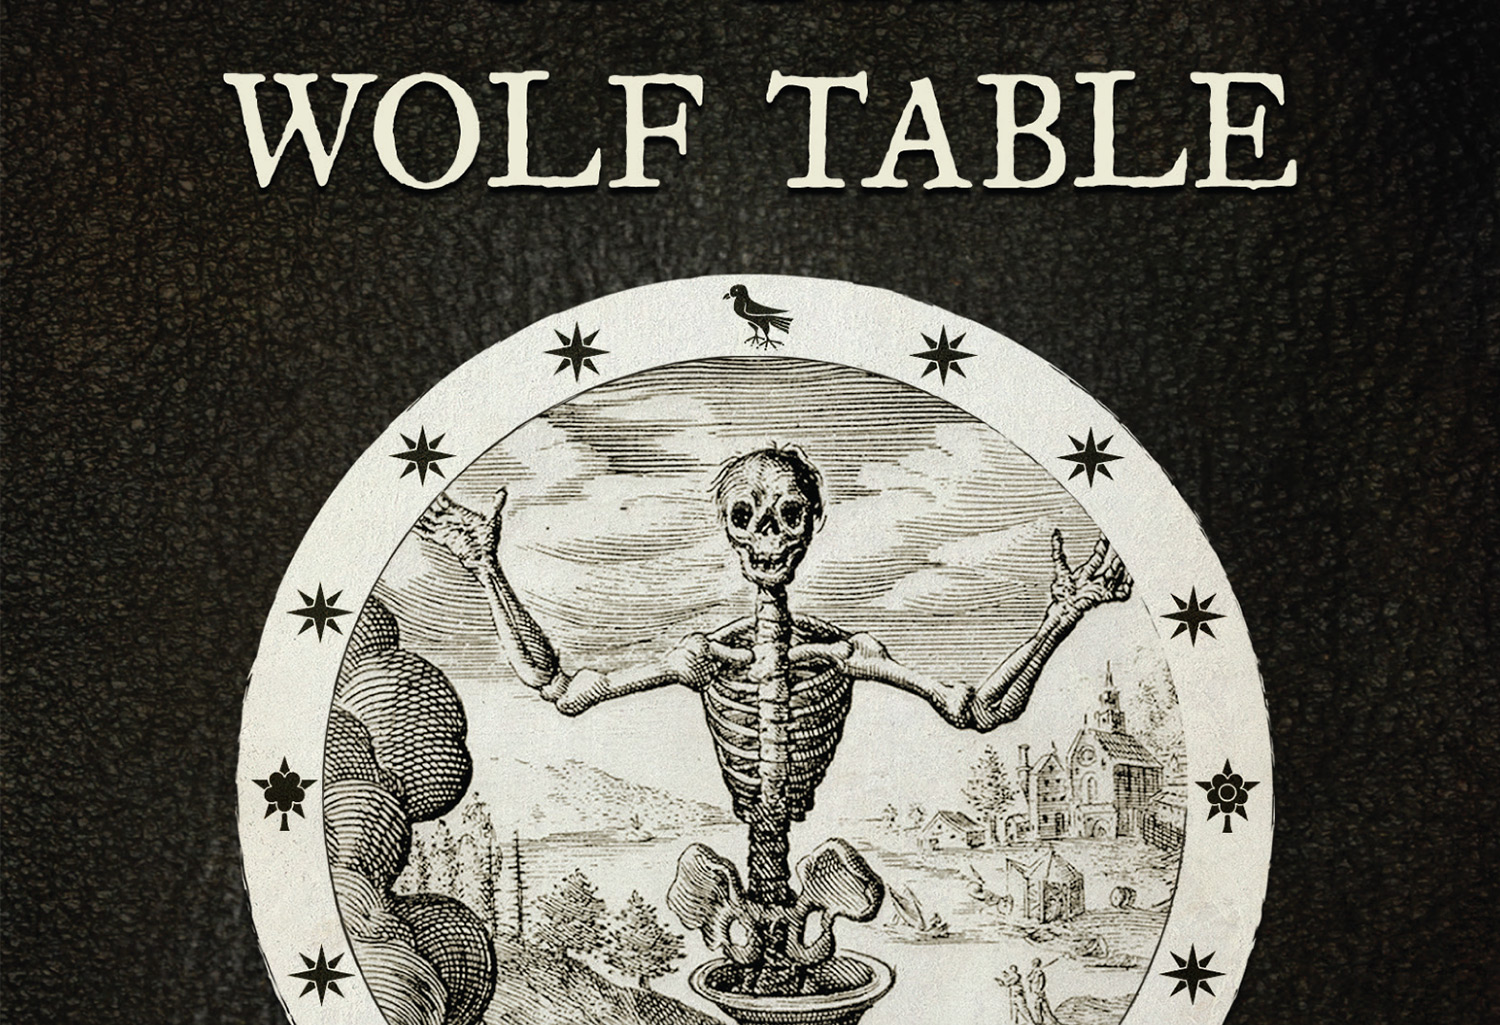 In the Spirit of the Wolf Table